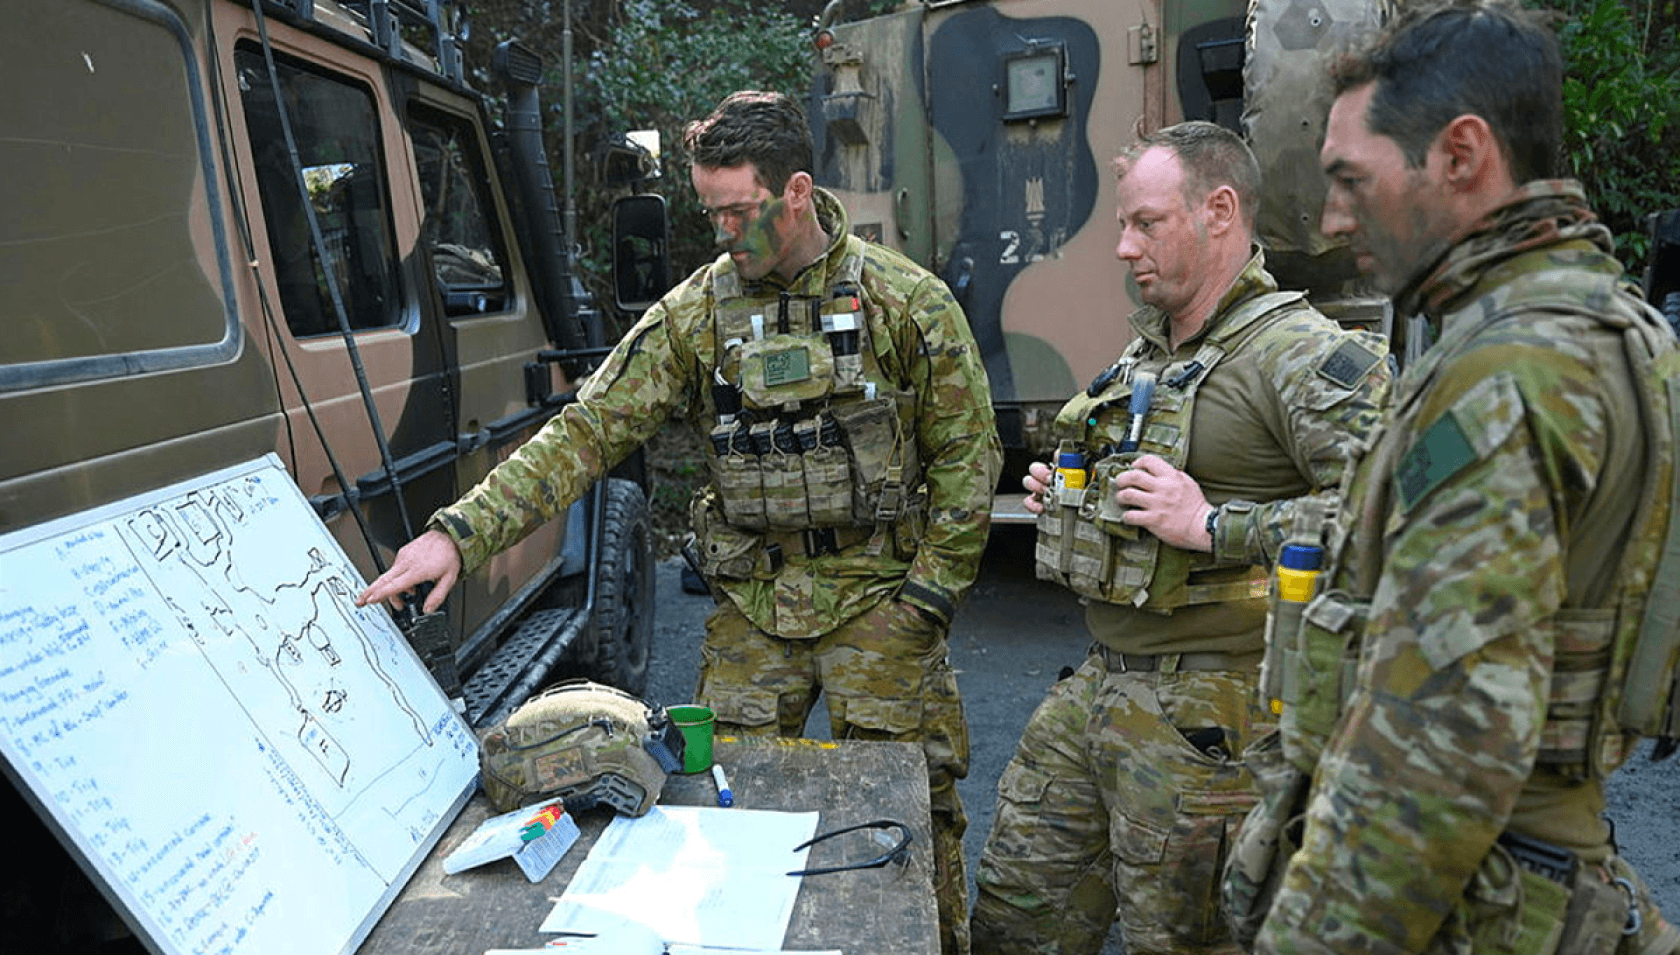 Army personnel discuss the stragey on a whiteboard.